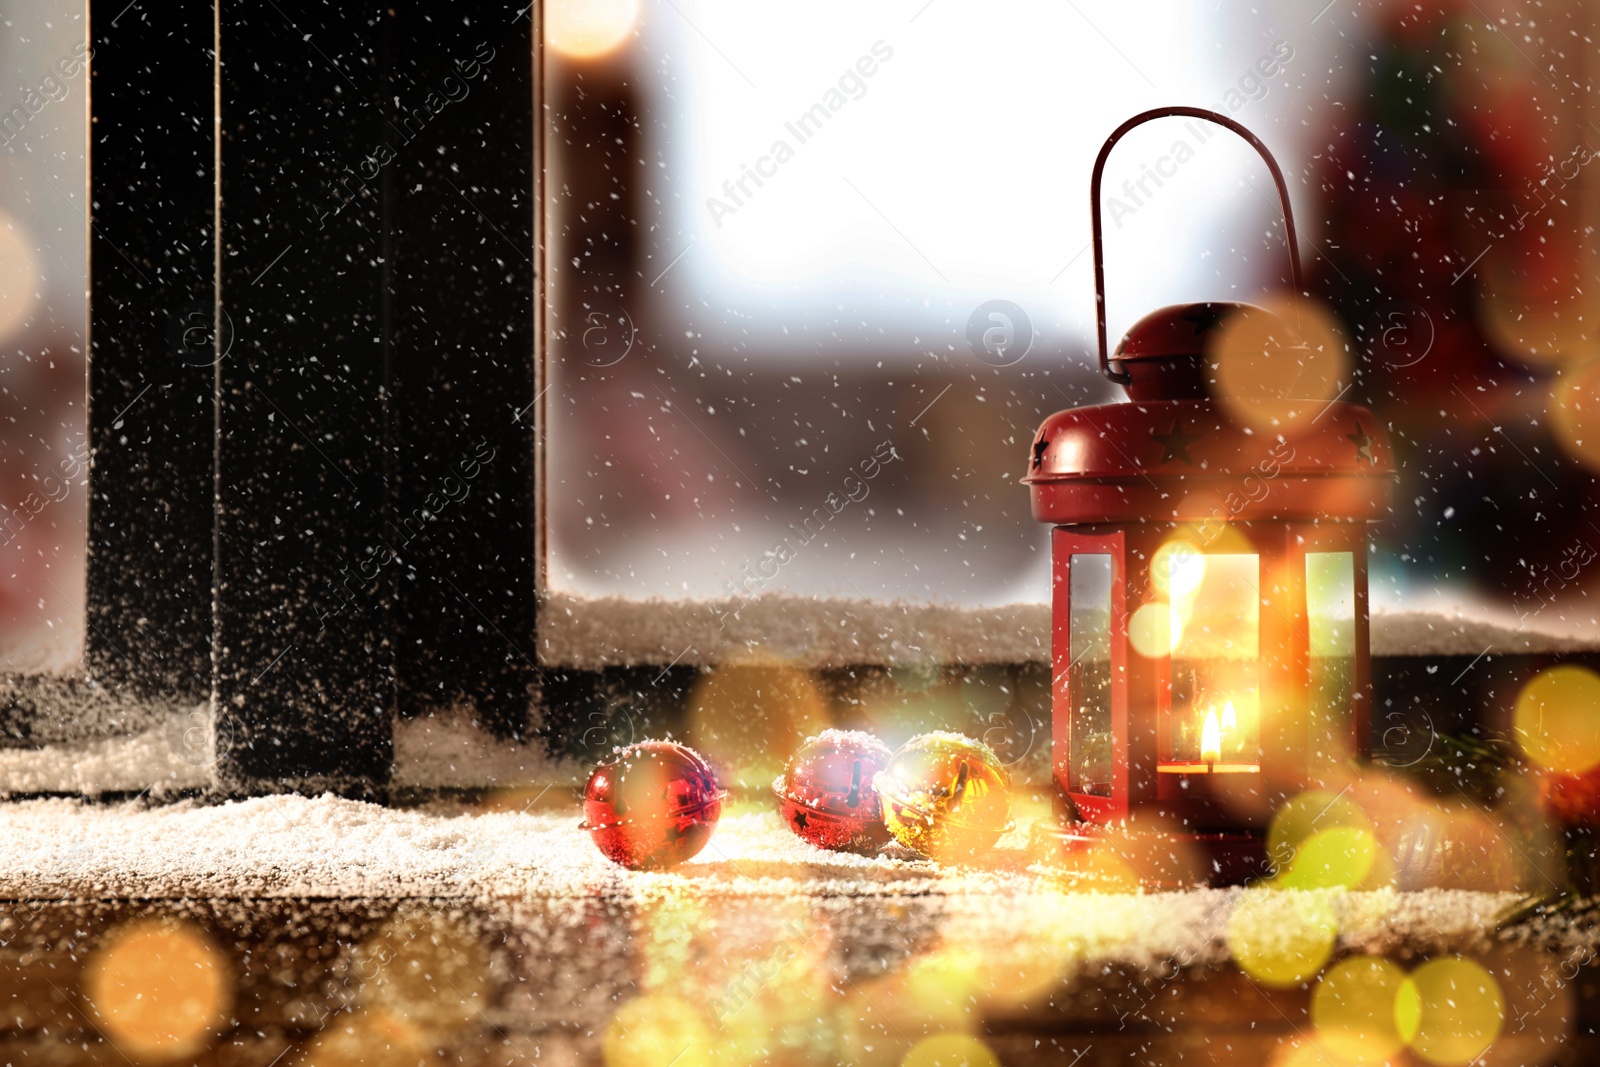 Image of Red lantern with candle and bells near window outdoors. Christmas eve